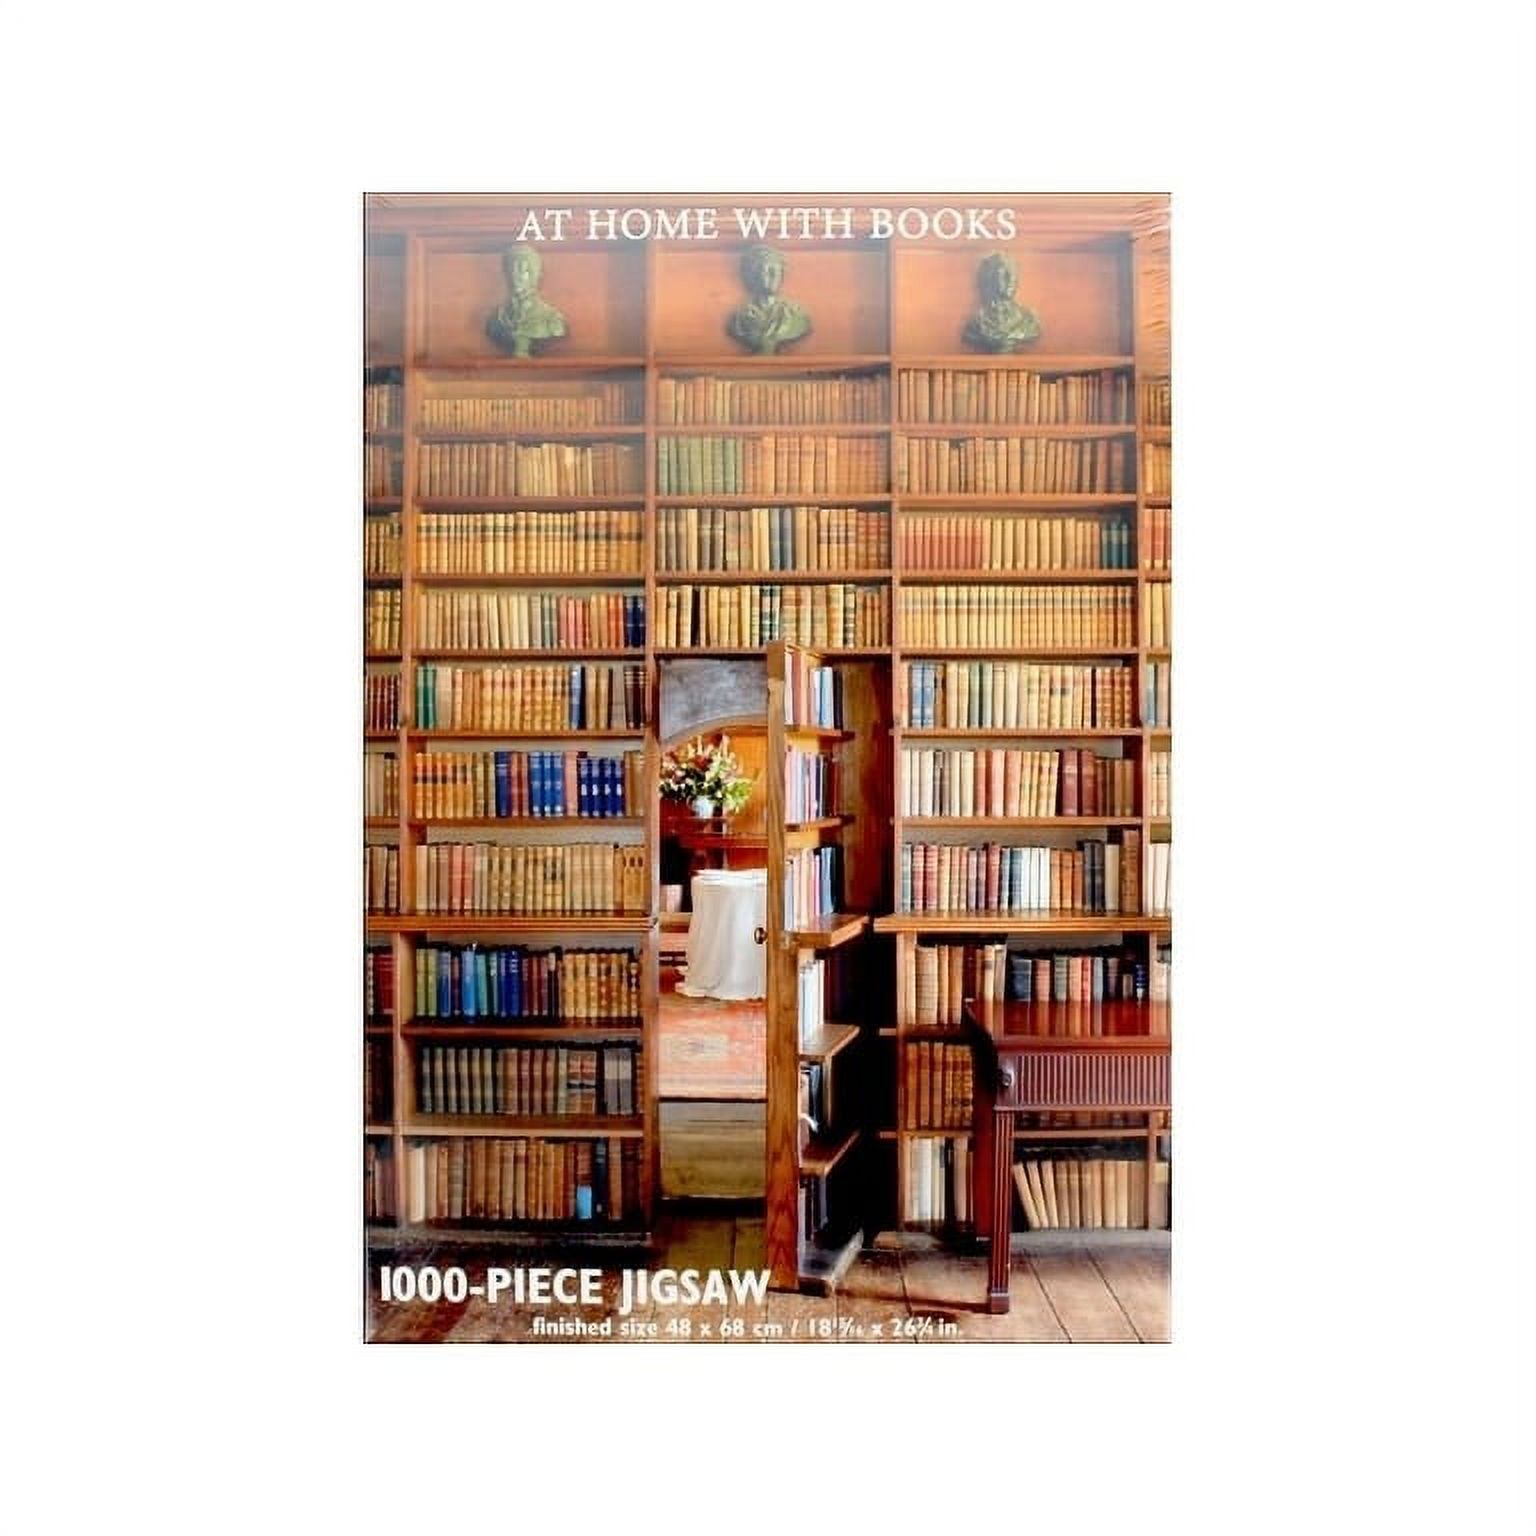 At Home with Books Jigsaw Puzzle (Mixed media product) - image 2 of 2